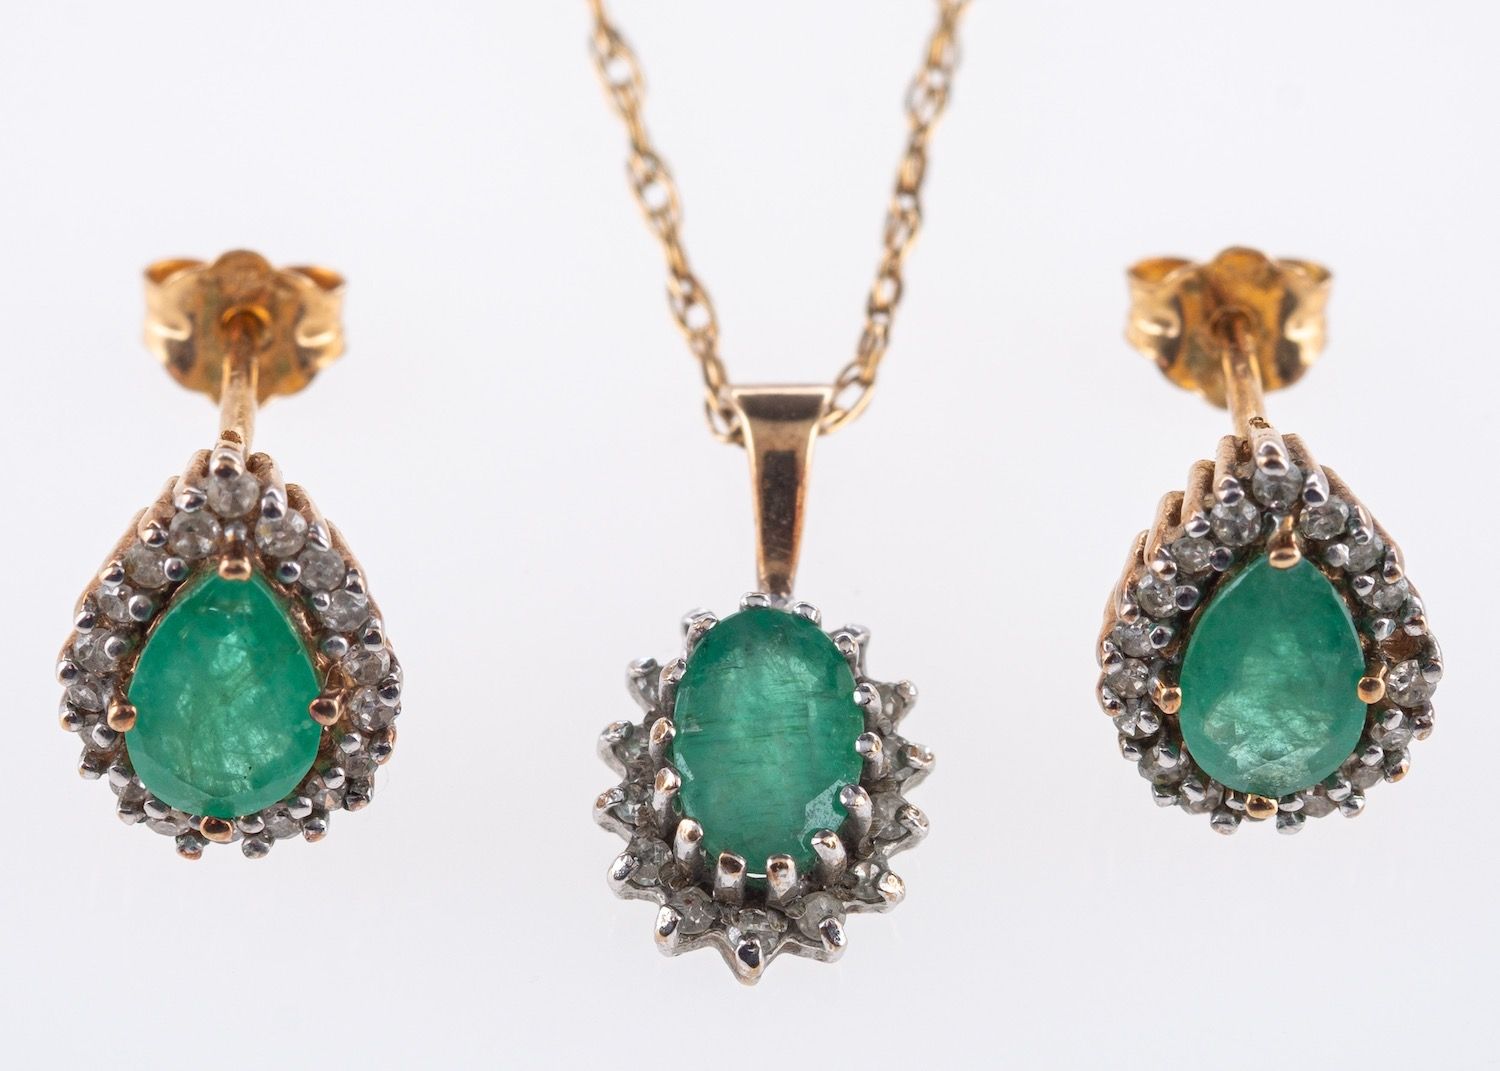 An emerald and diamond necklace and earrings,